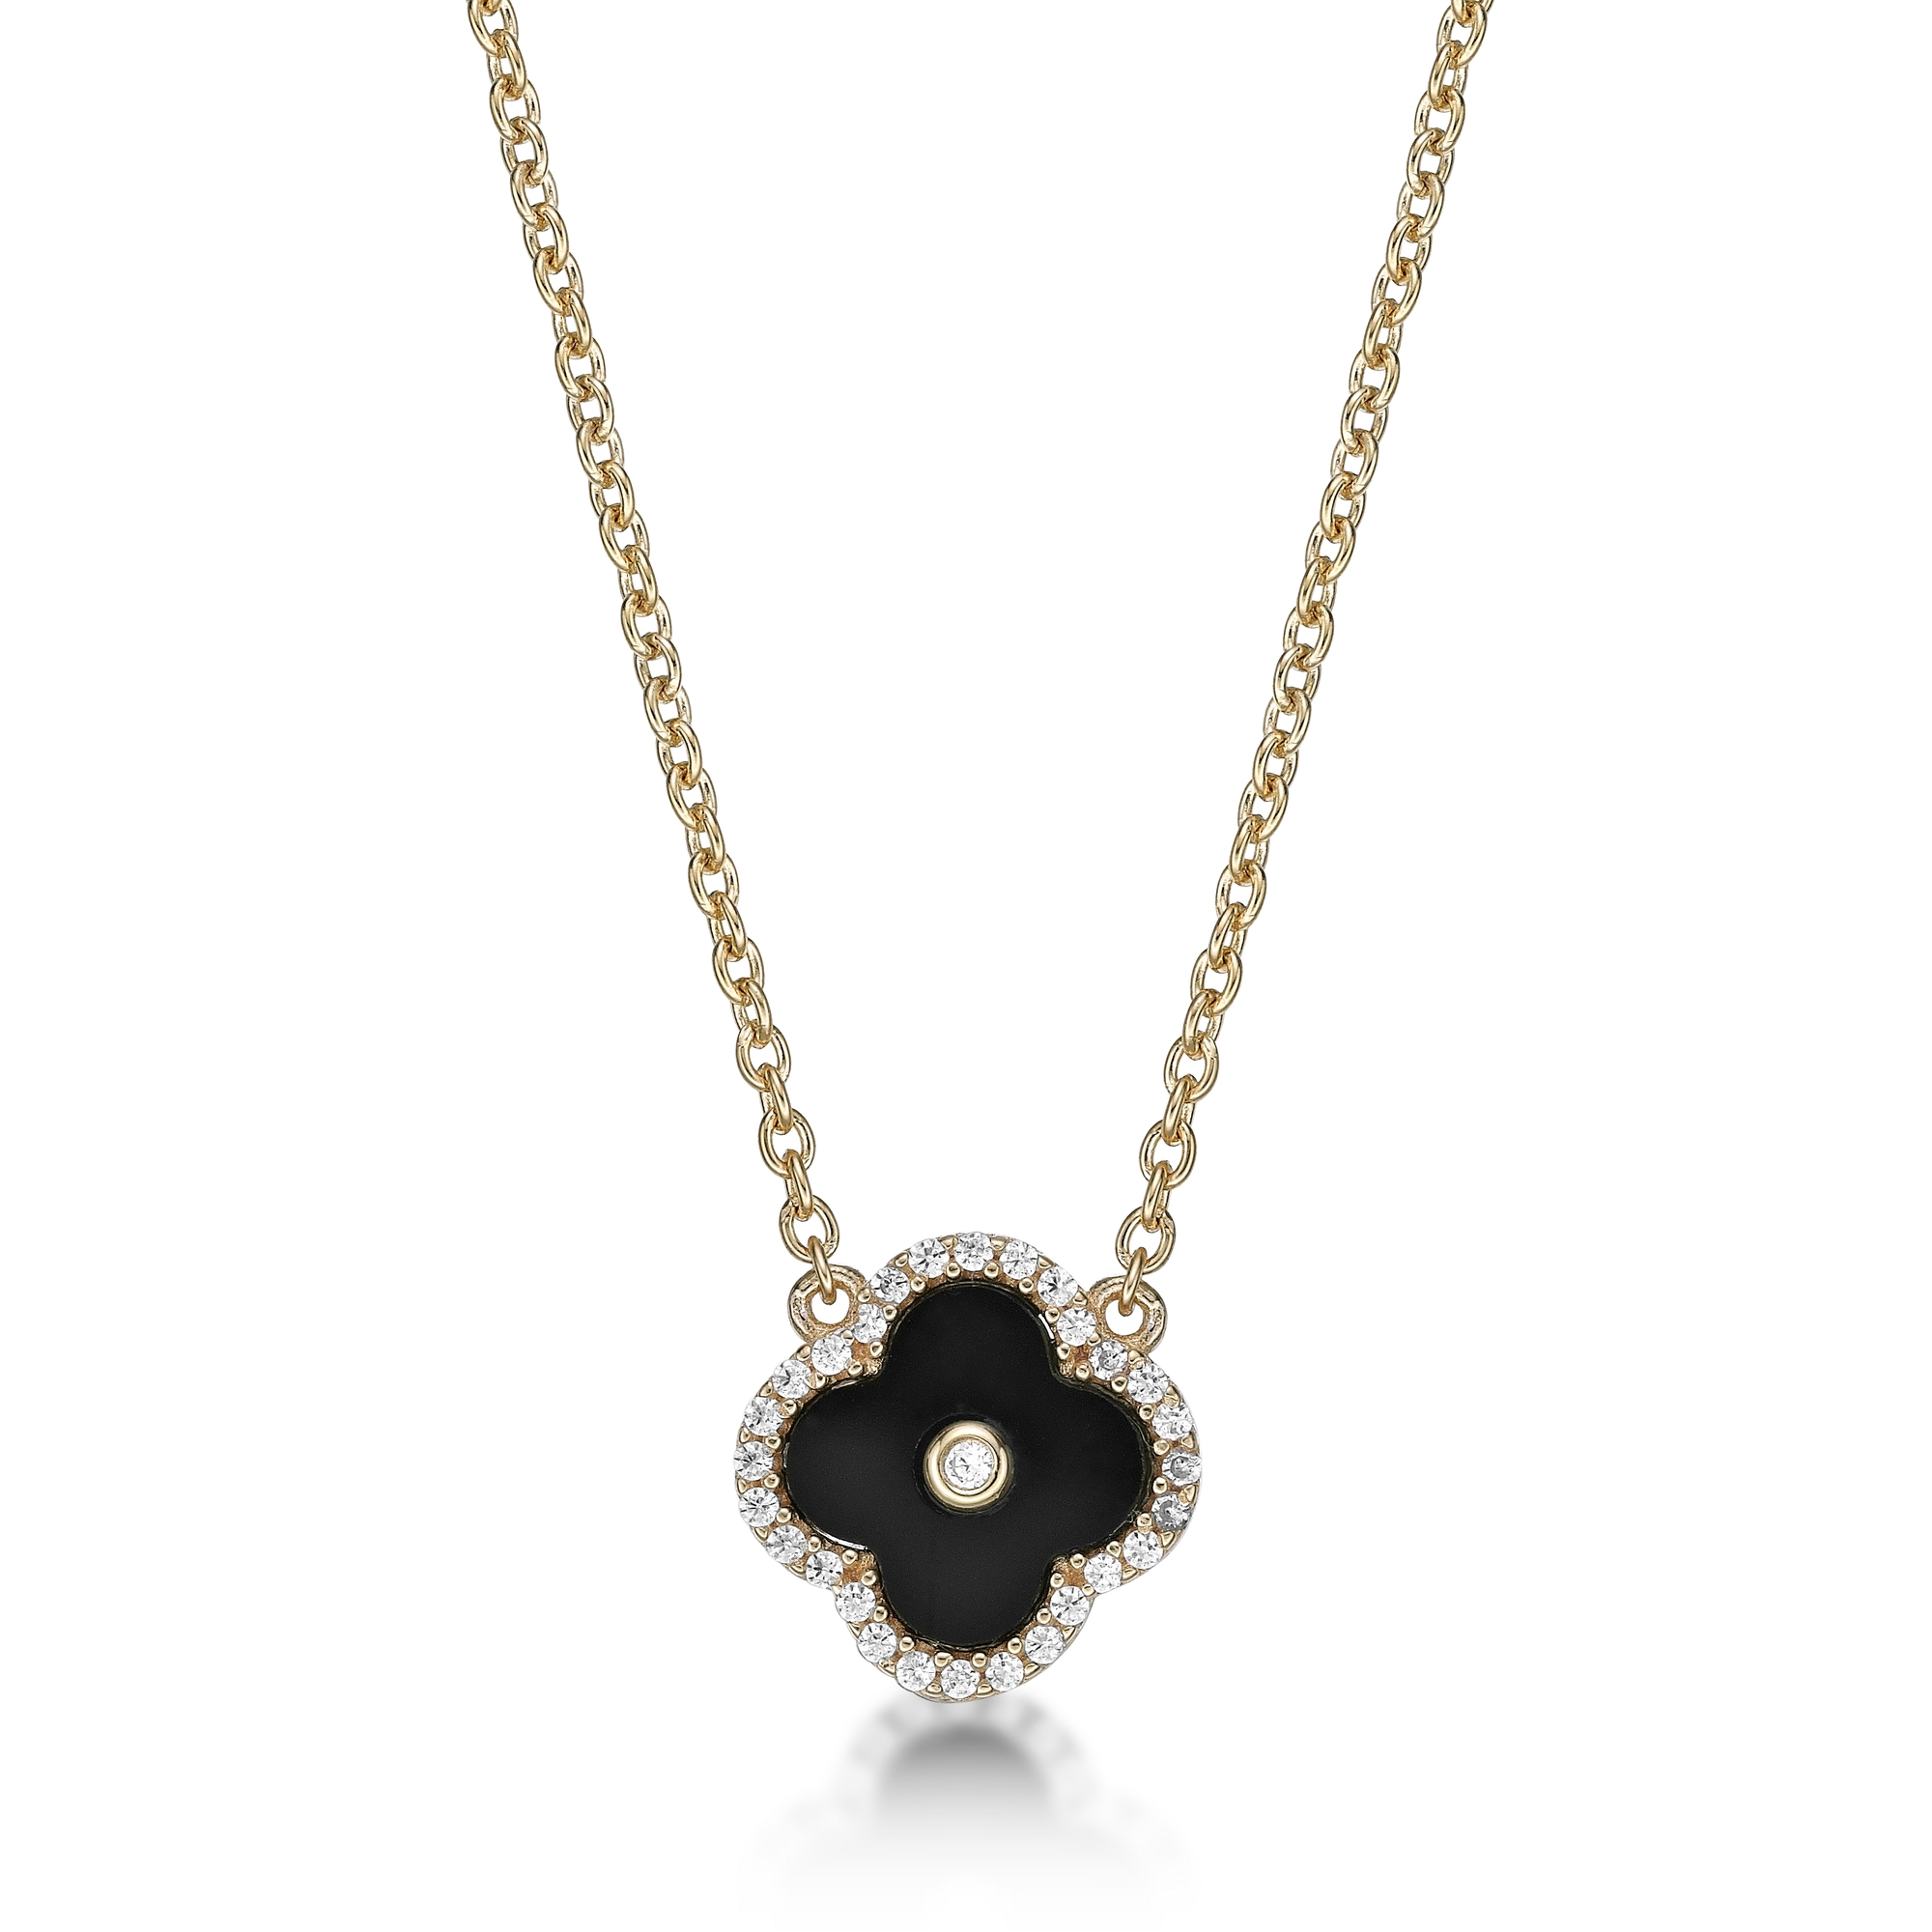 Women's Black Onyx Flower Pendant Necklace in Yellow Gold Plated Sterling Silver with Cubic Zirconia Halo - 18 Inch Adjustable Cable Chain - Flora | Lavari Jewelers